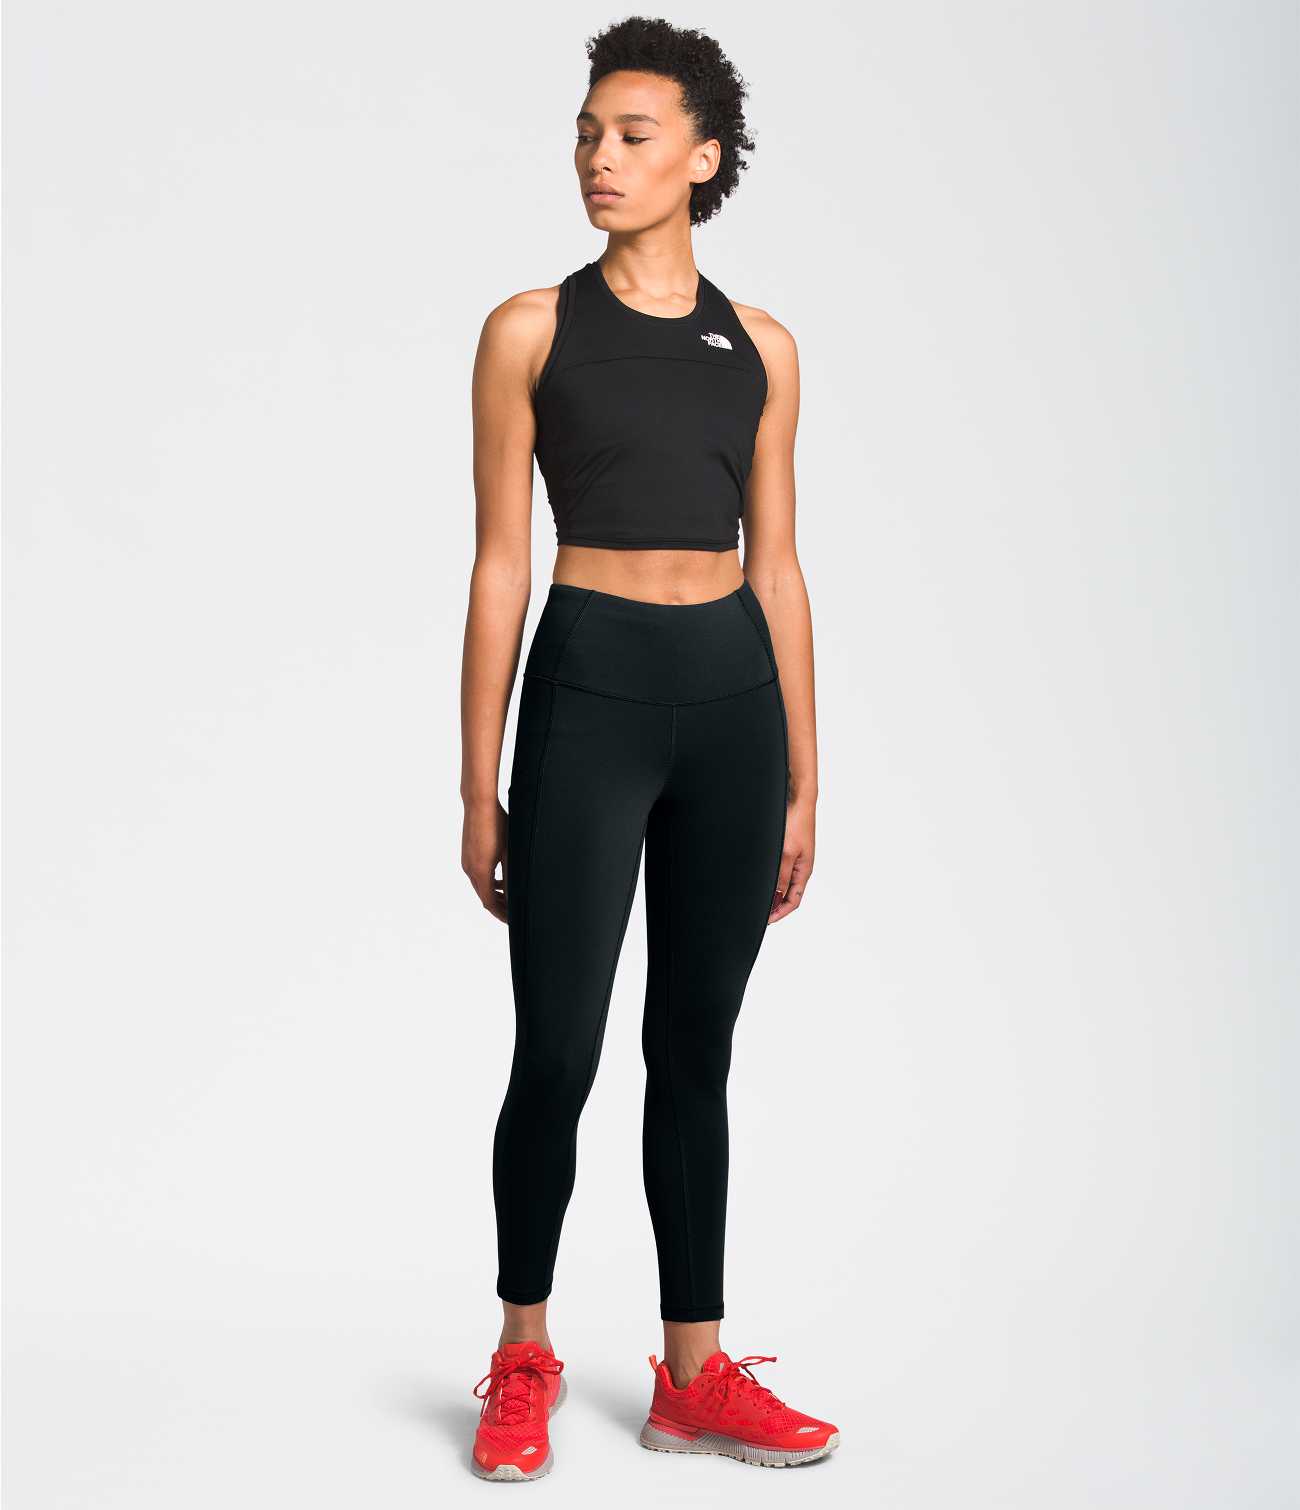 The North Face Black Leggings Size L - 65% off